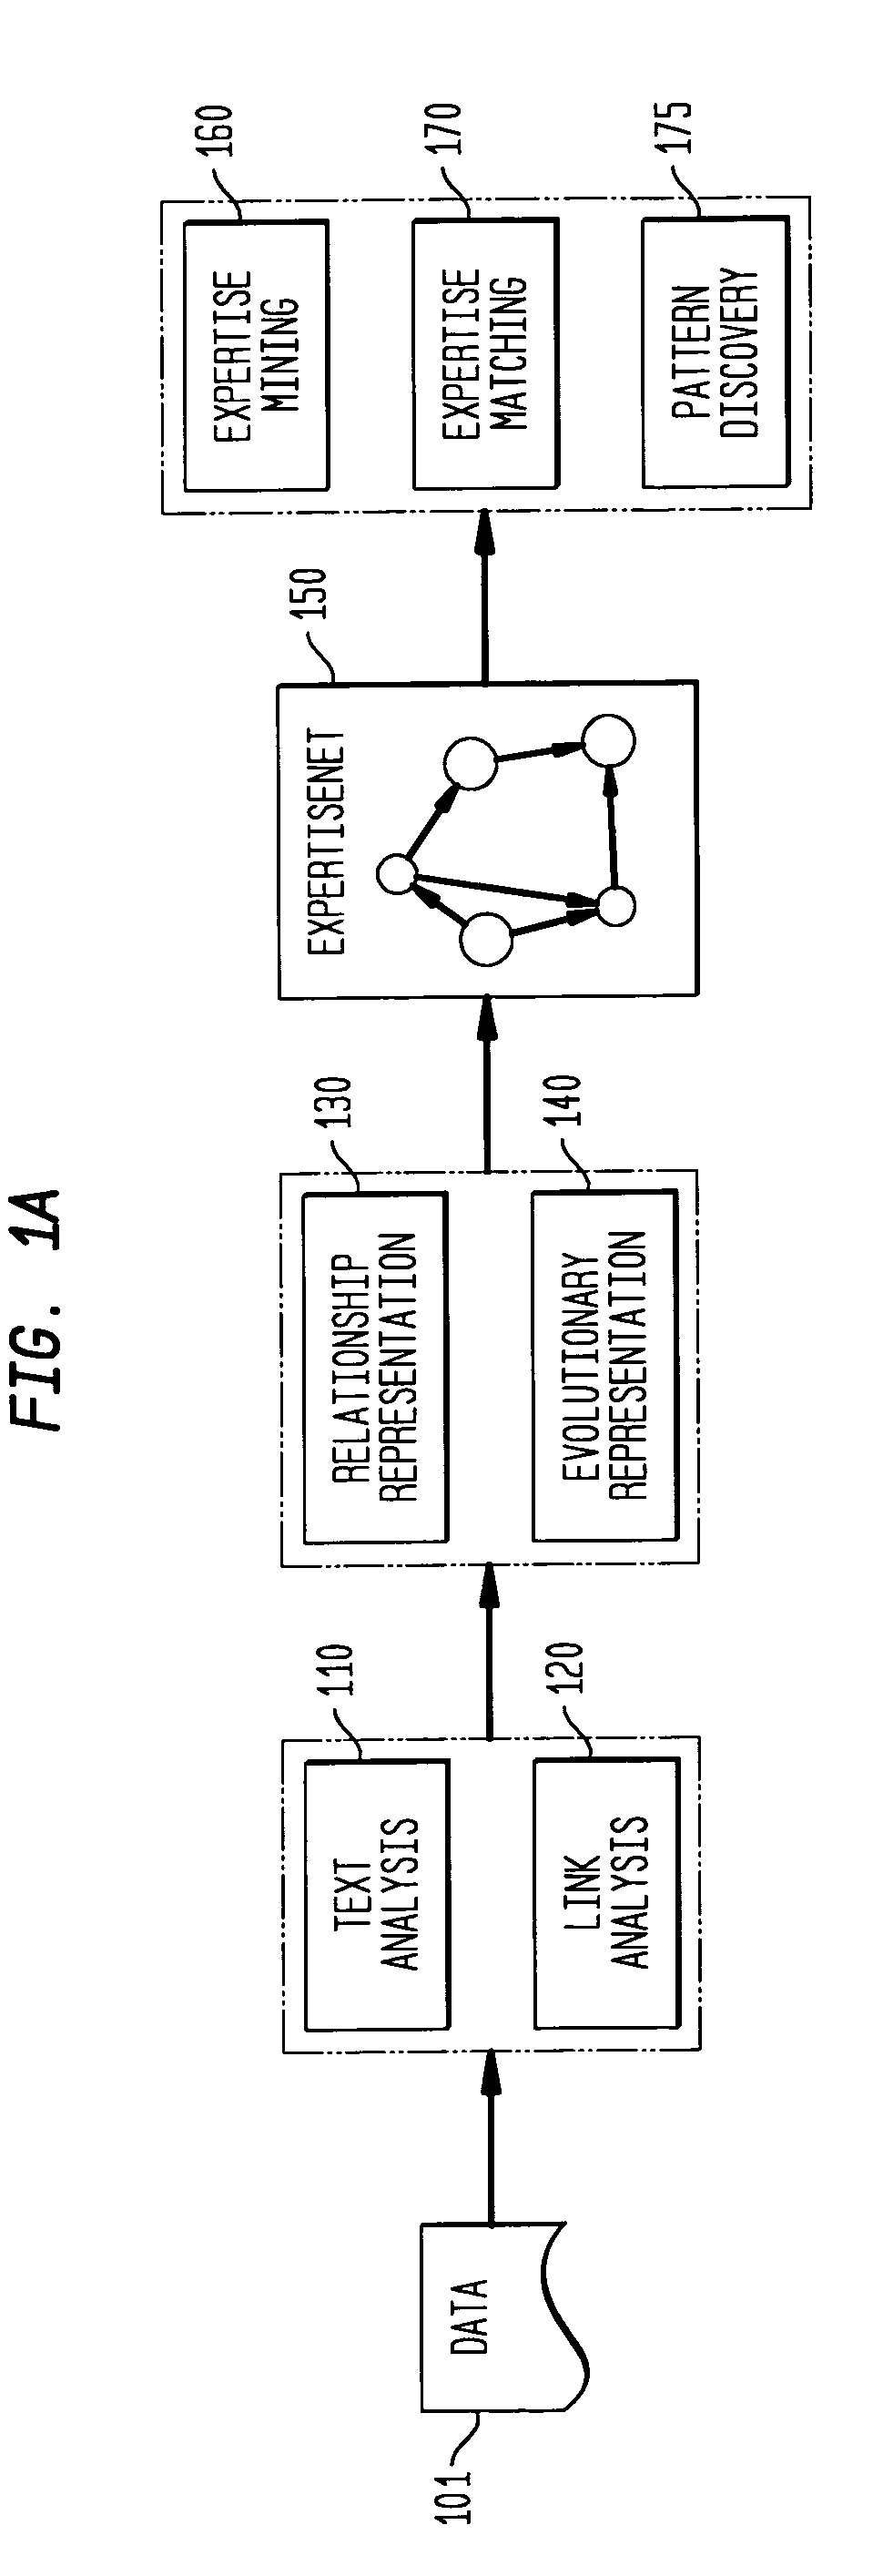 Systems and methods for data analysis and/or knowledge management